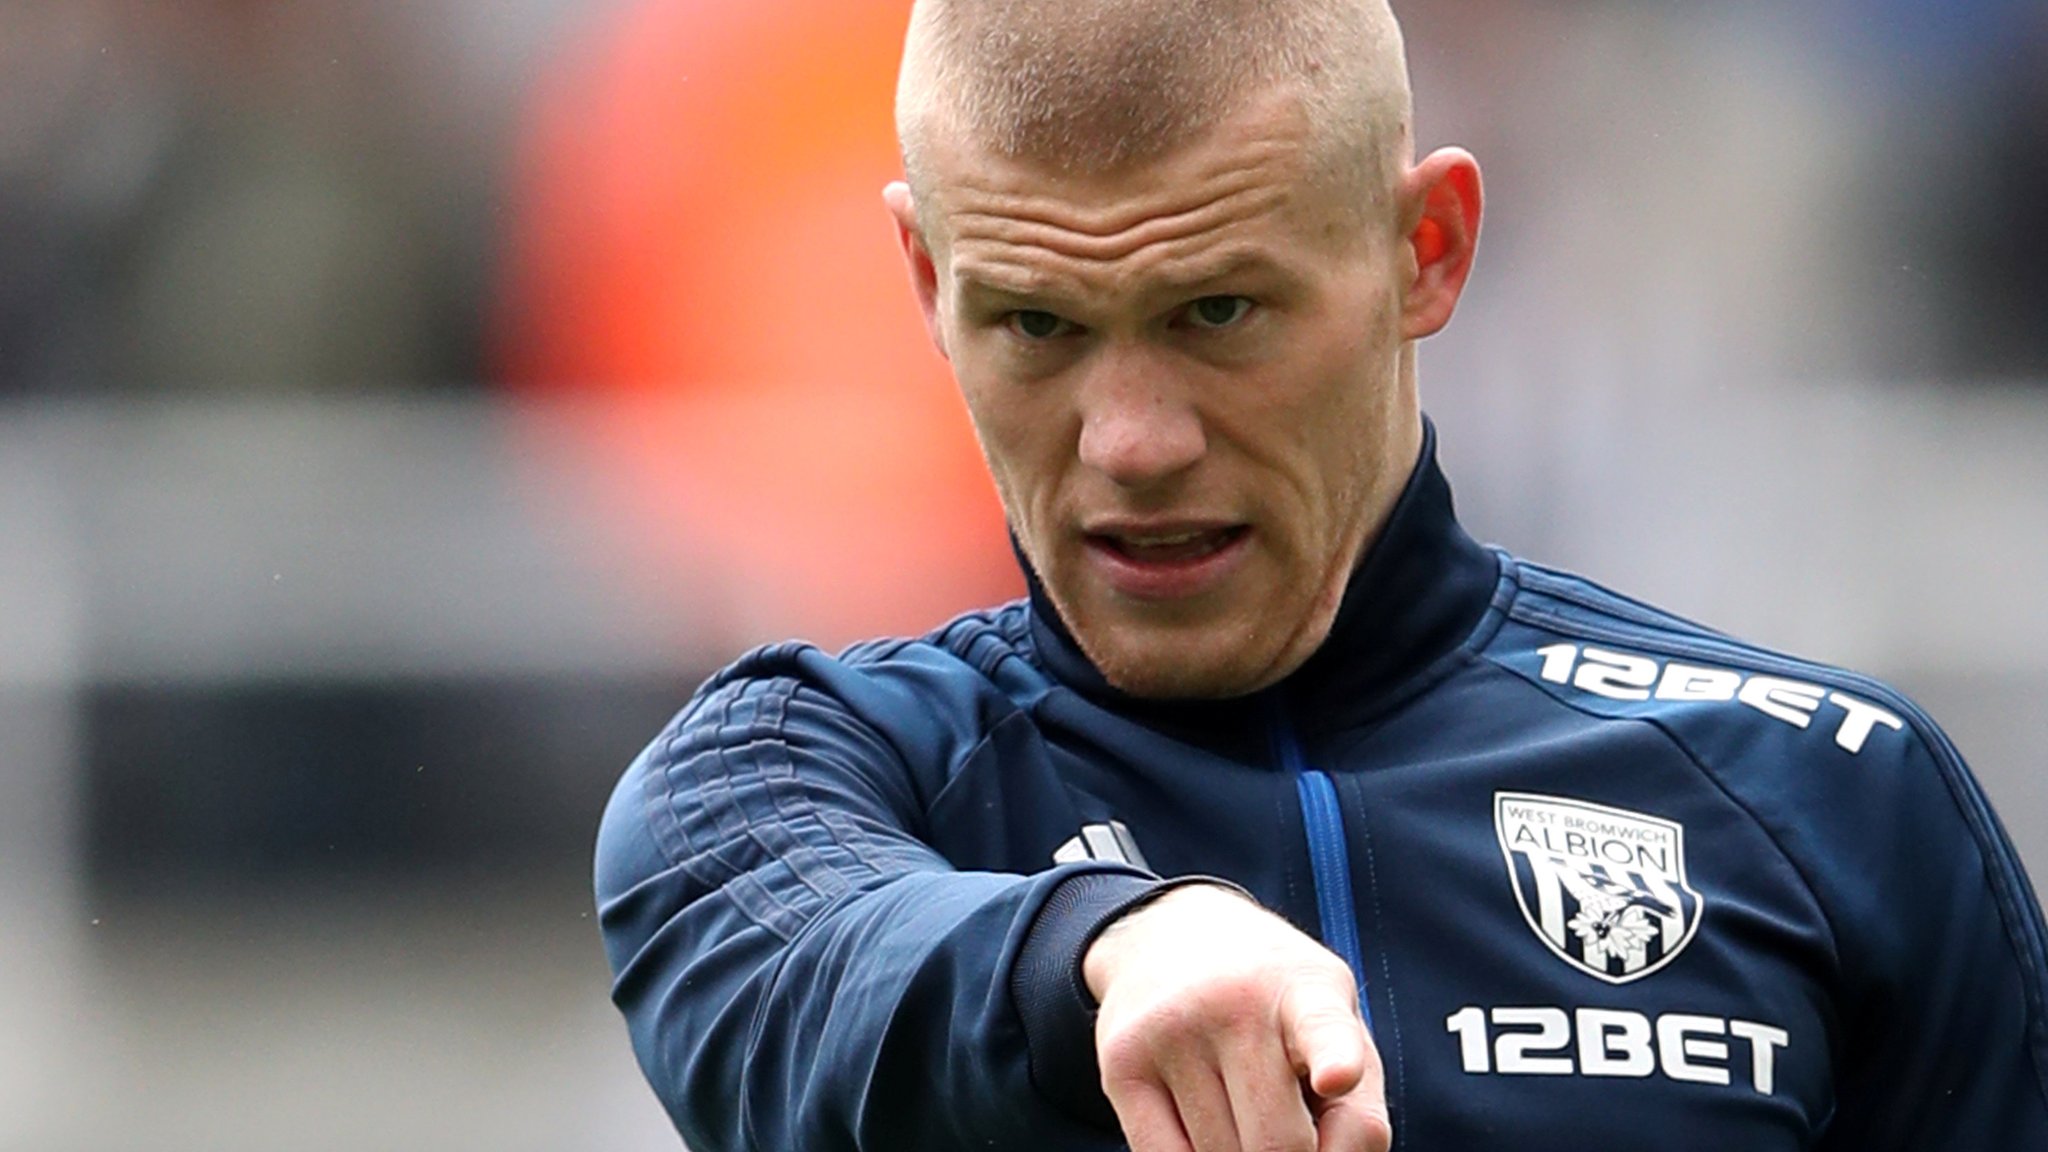 James McClean: Stoke City sign West Bromwich Albion winger for initial £5m